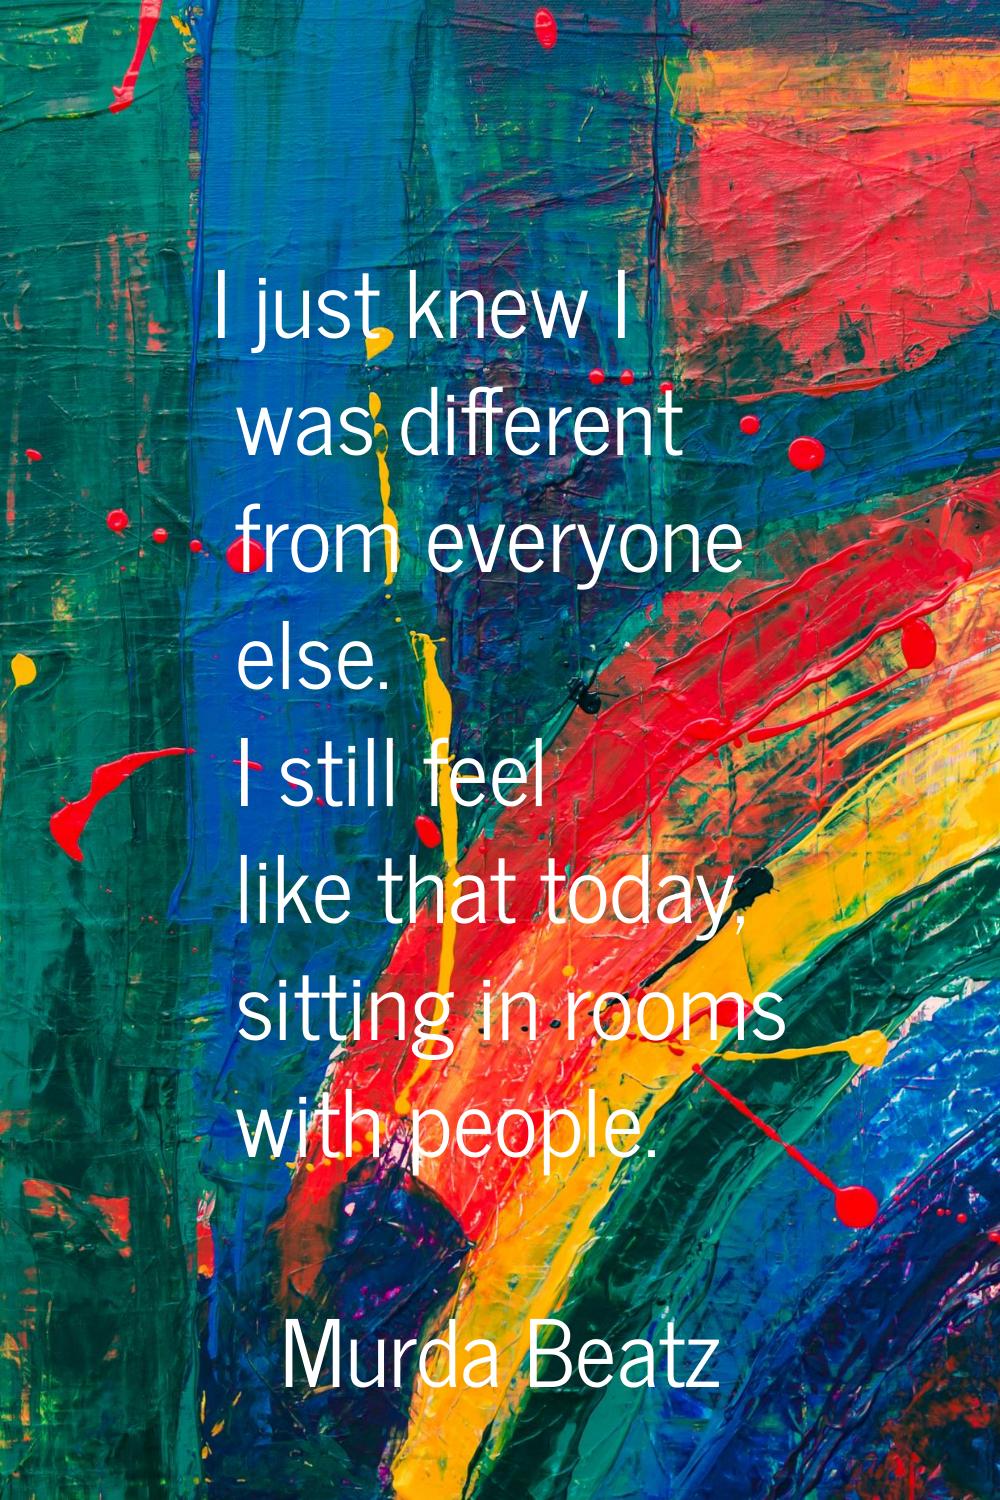 I just knew I was different from everyone else. I still feel like that today, sitting in rooms with